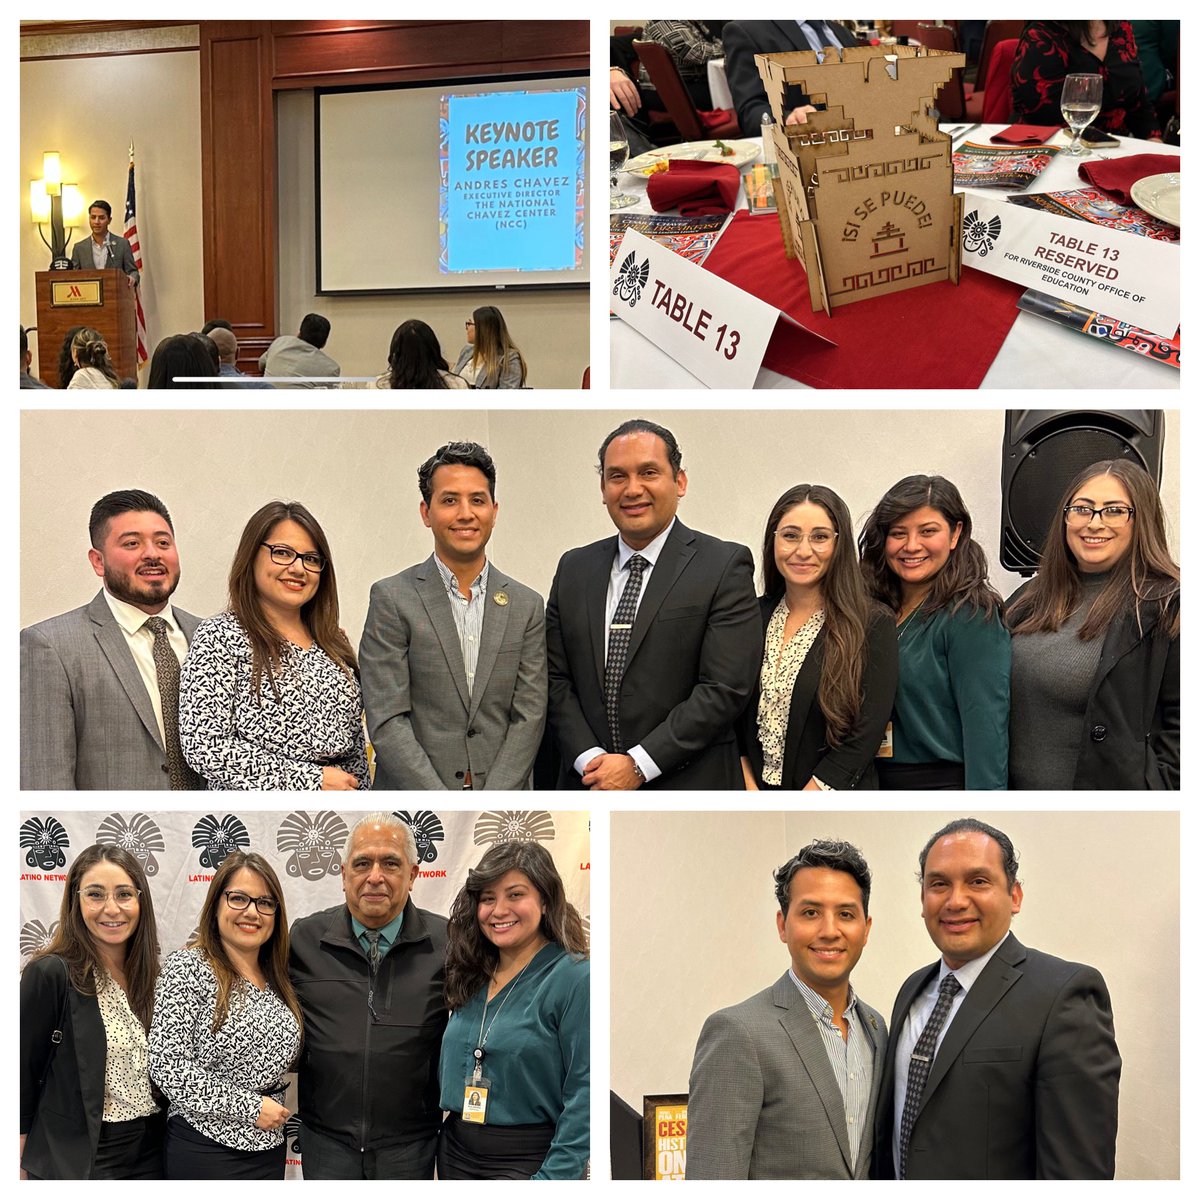 Honored to attend @RiversideLaNet Annual César E. Chávez Memorial Breakfast today with some of the @RCOE team. Many great #RivCo community leaders in attendance to pay tribute to the #CivilRights leader & hear keynote Andres Chavez @NatlChavezCtr Exec Director. #CesarChavezDay